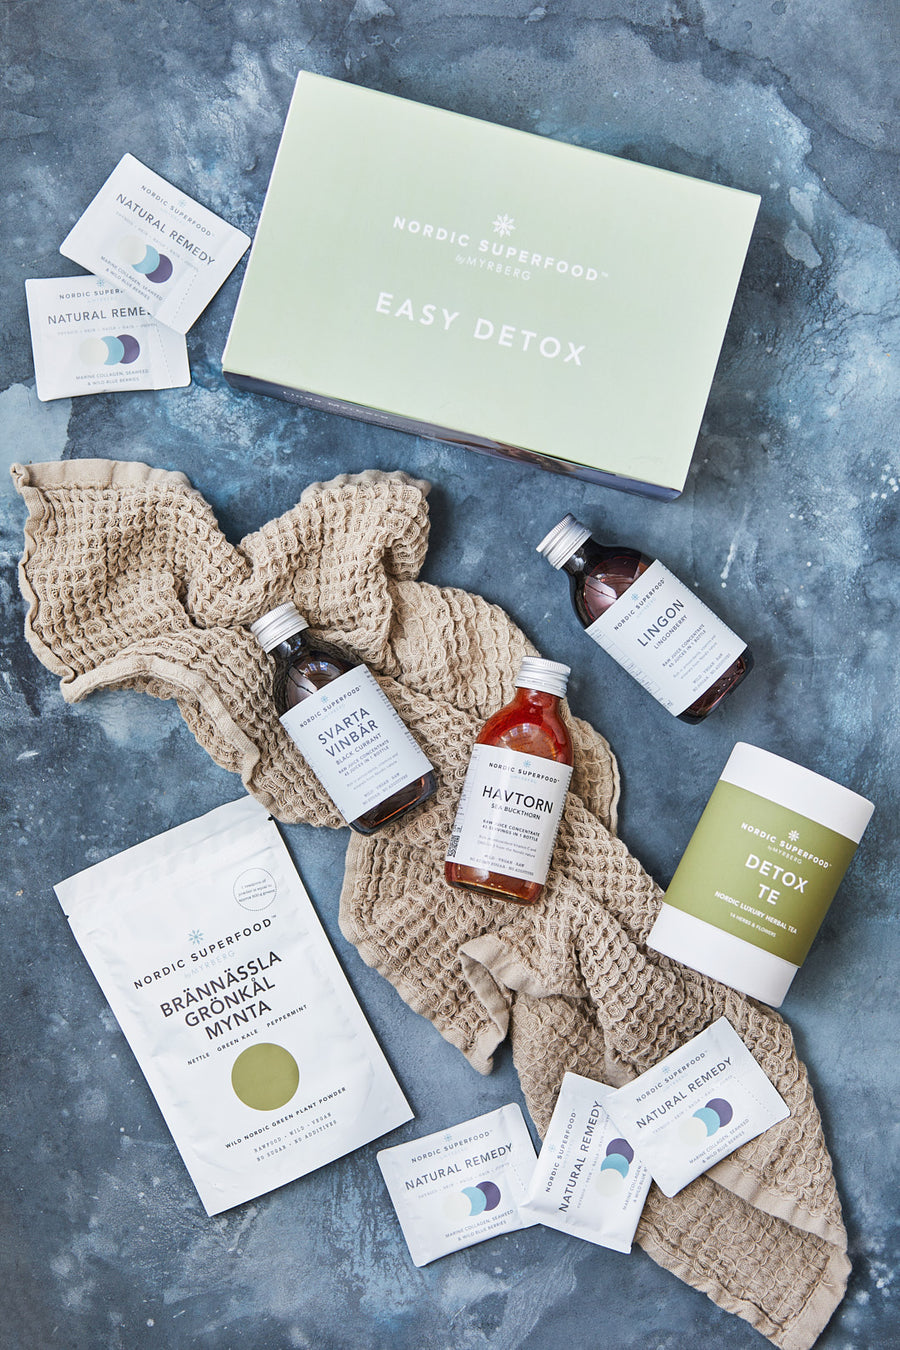 Easy Detox Box - Nordic Superfood by Myrberg